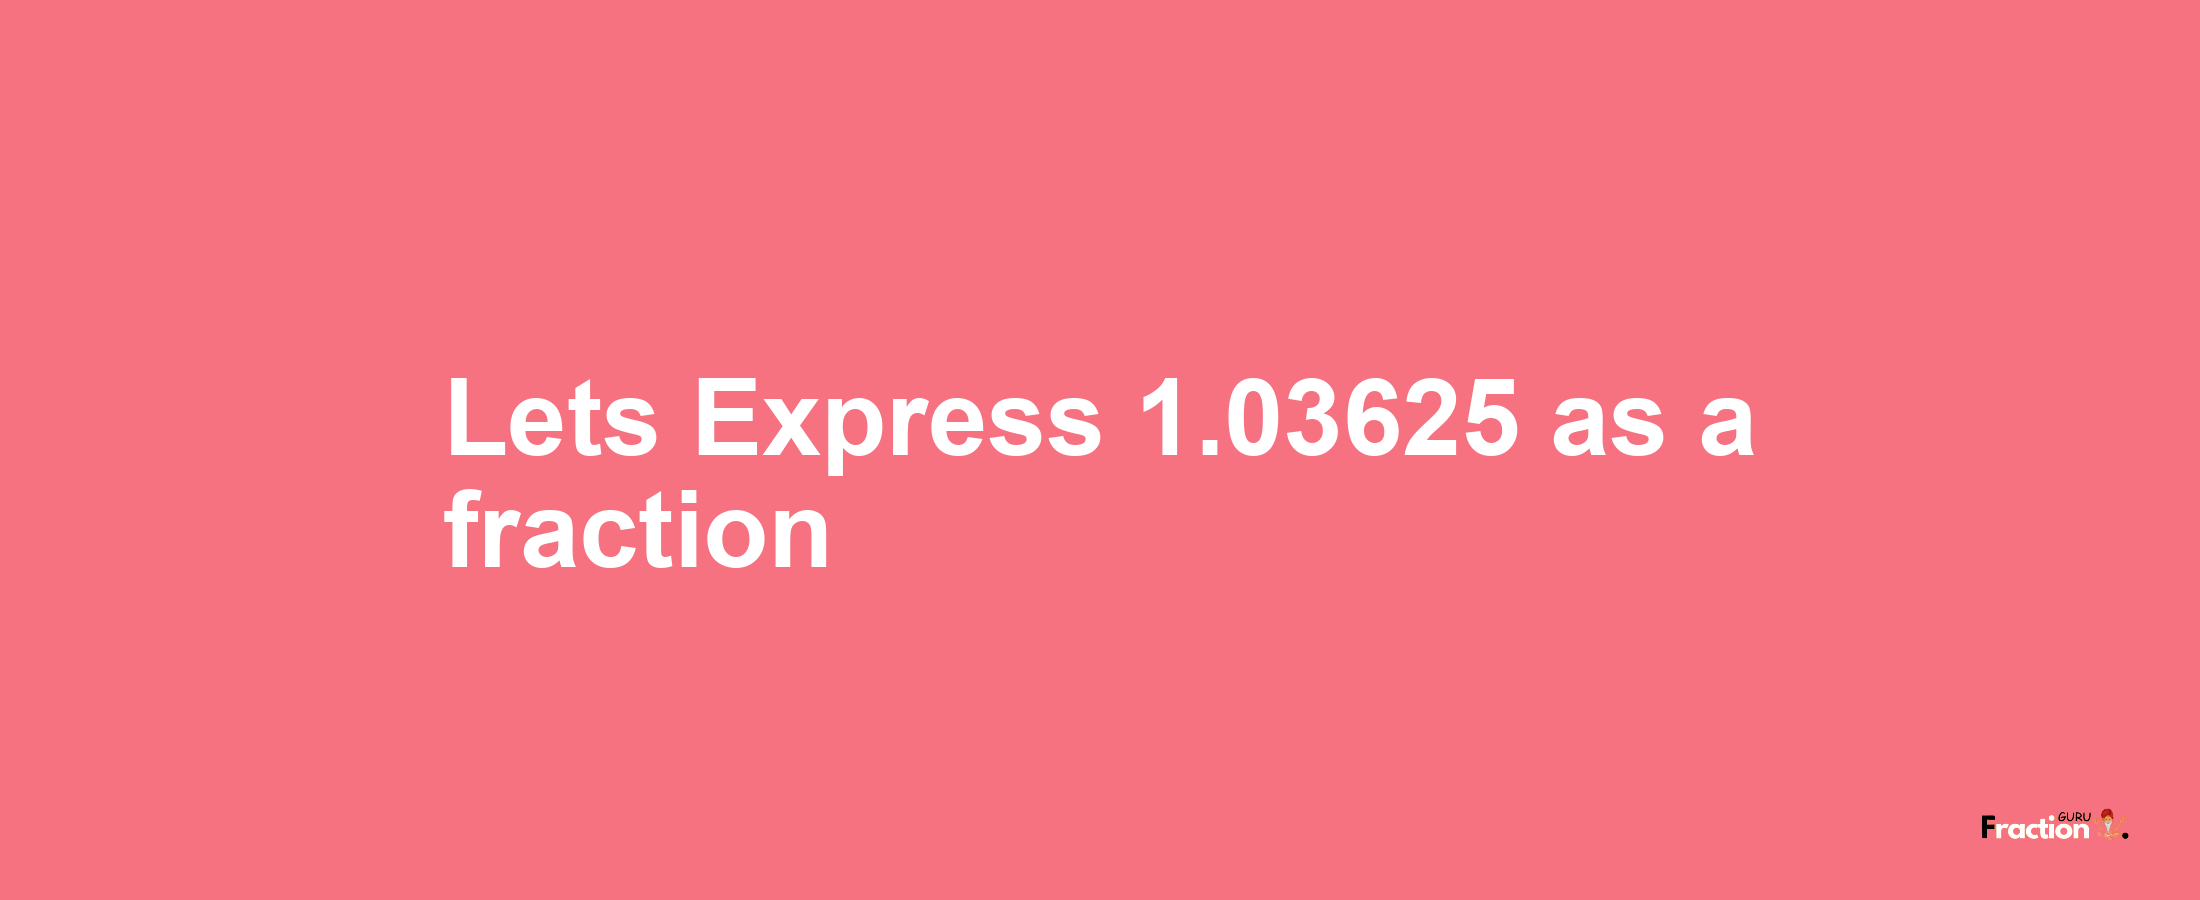 Lets Express 1.03625 as afraction